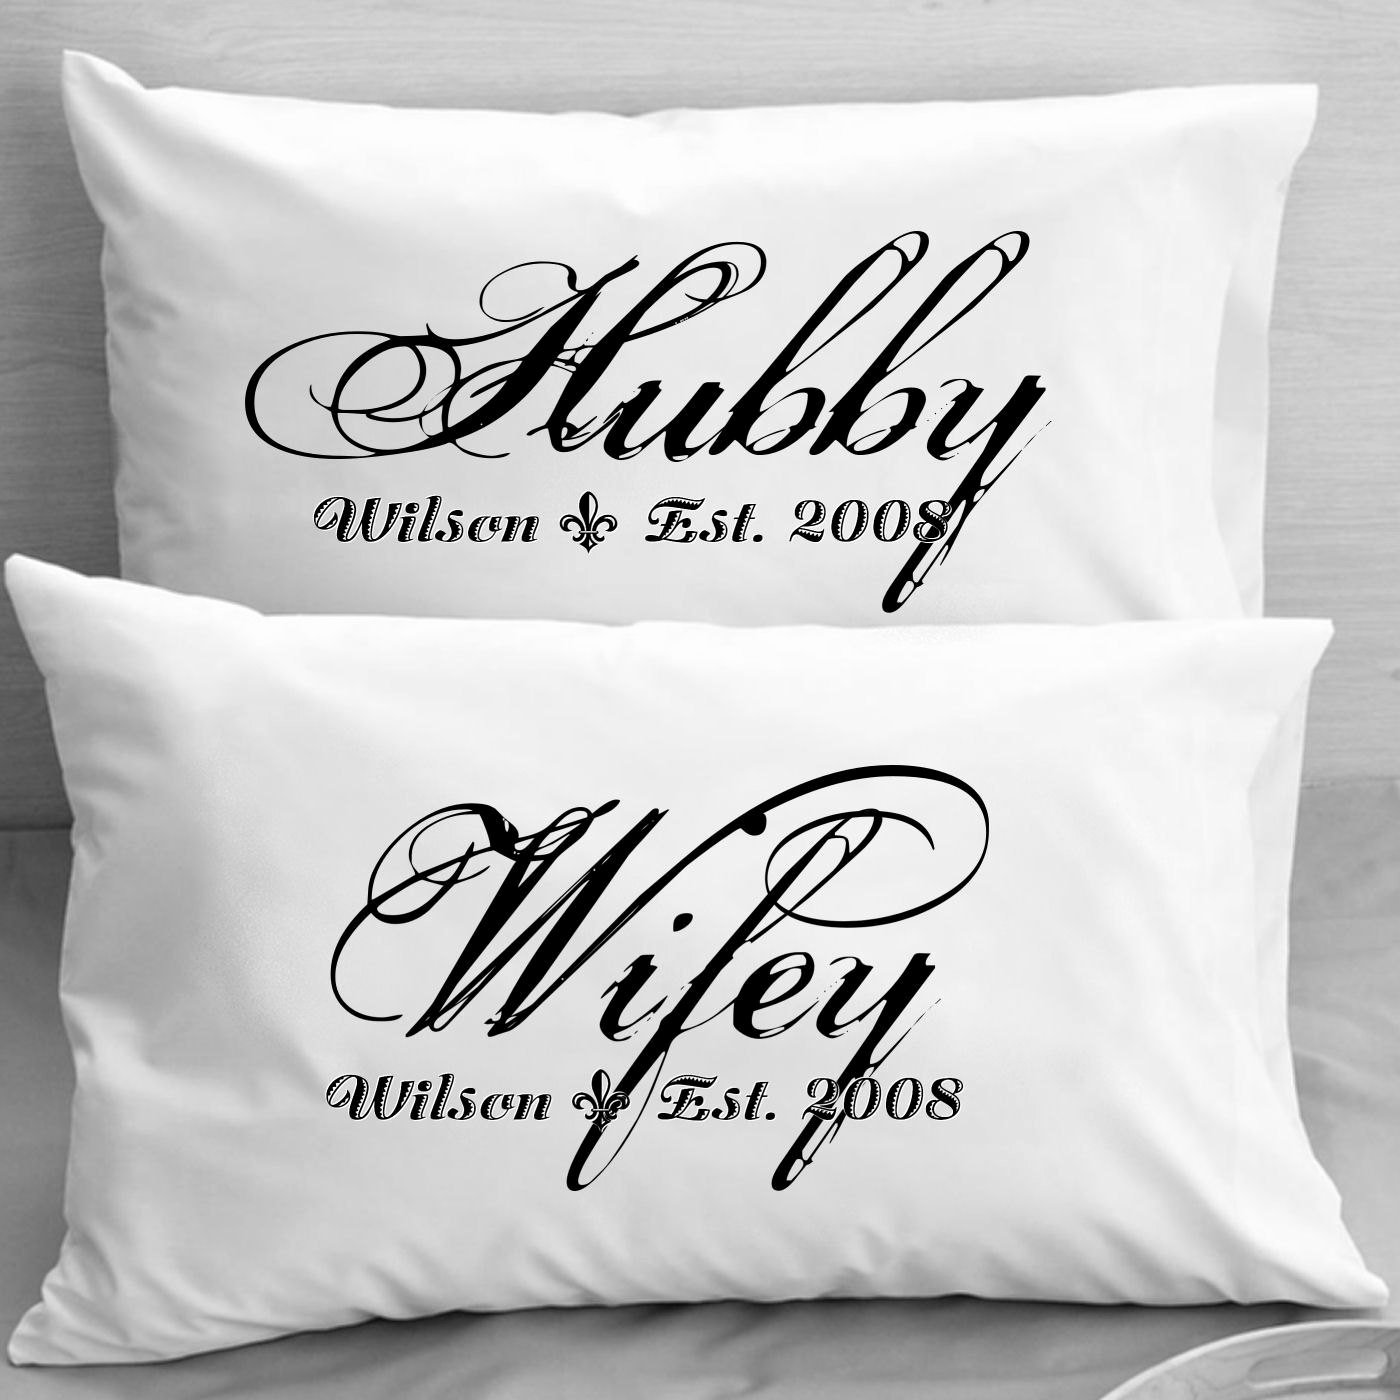 10 Awesome 2Nd Year Anniversary Gift Ideas For Her 2nd wedding anniversary gift ideas for him inspirational couples 1 2023